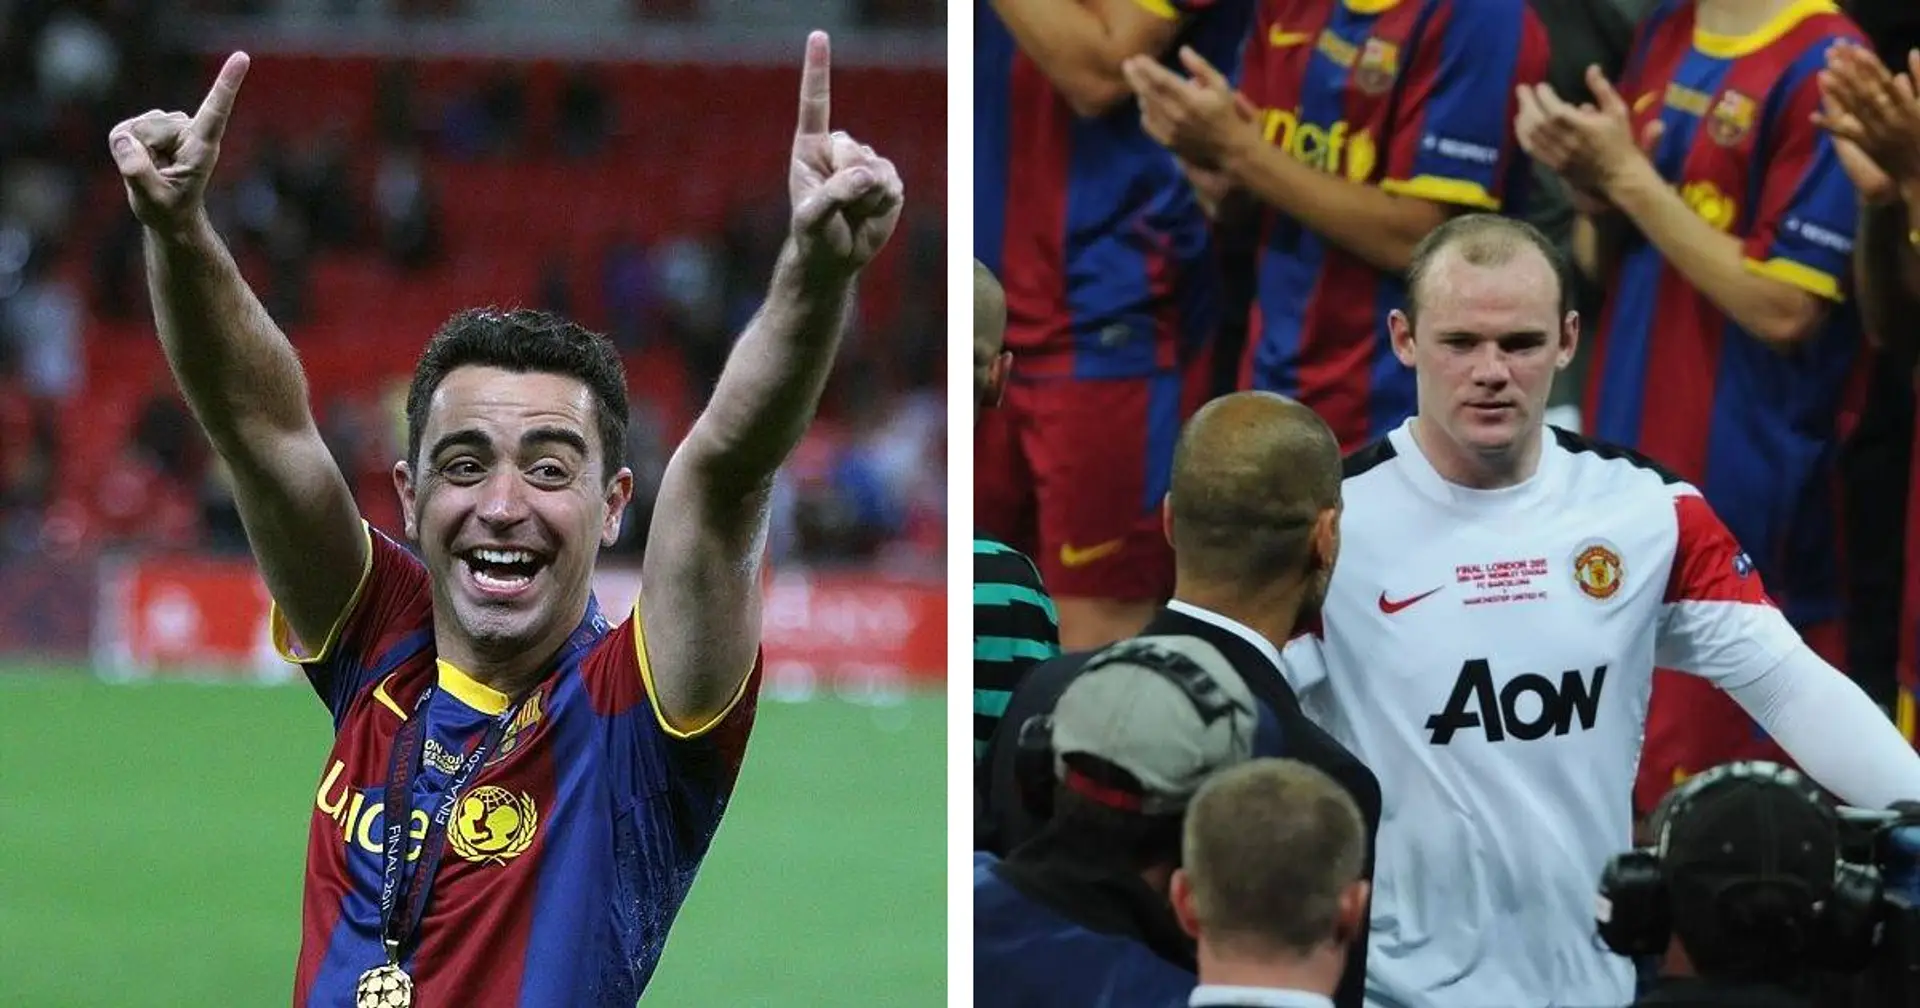 Short Wayne Rooney message to Xavi in CL 2011 final shows sheer strength of Pep's ultimate team